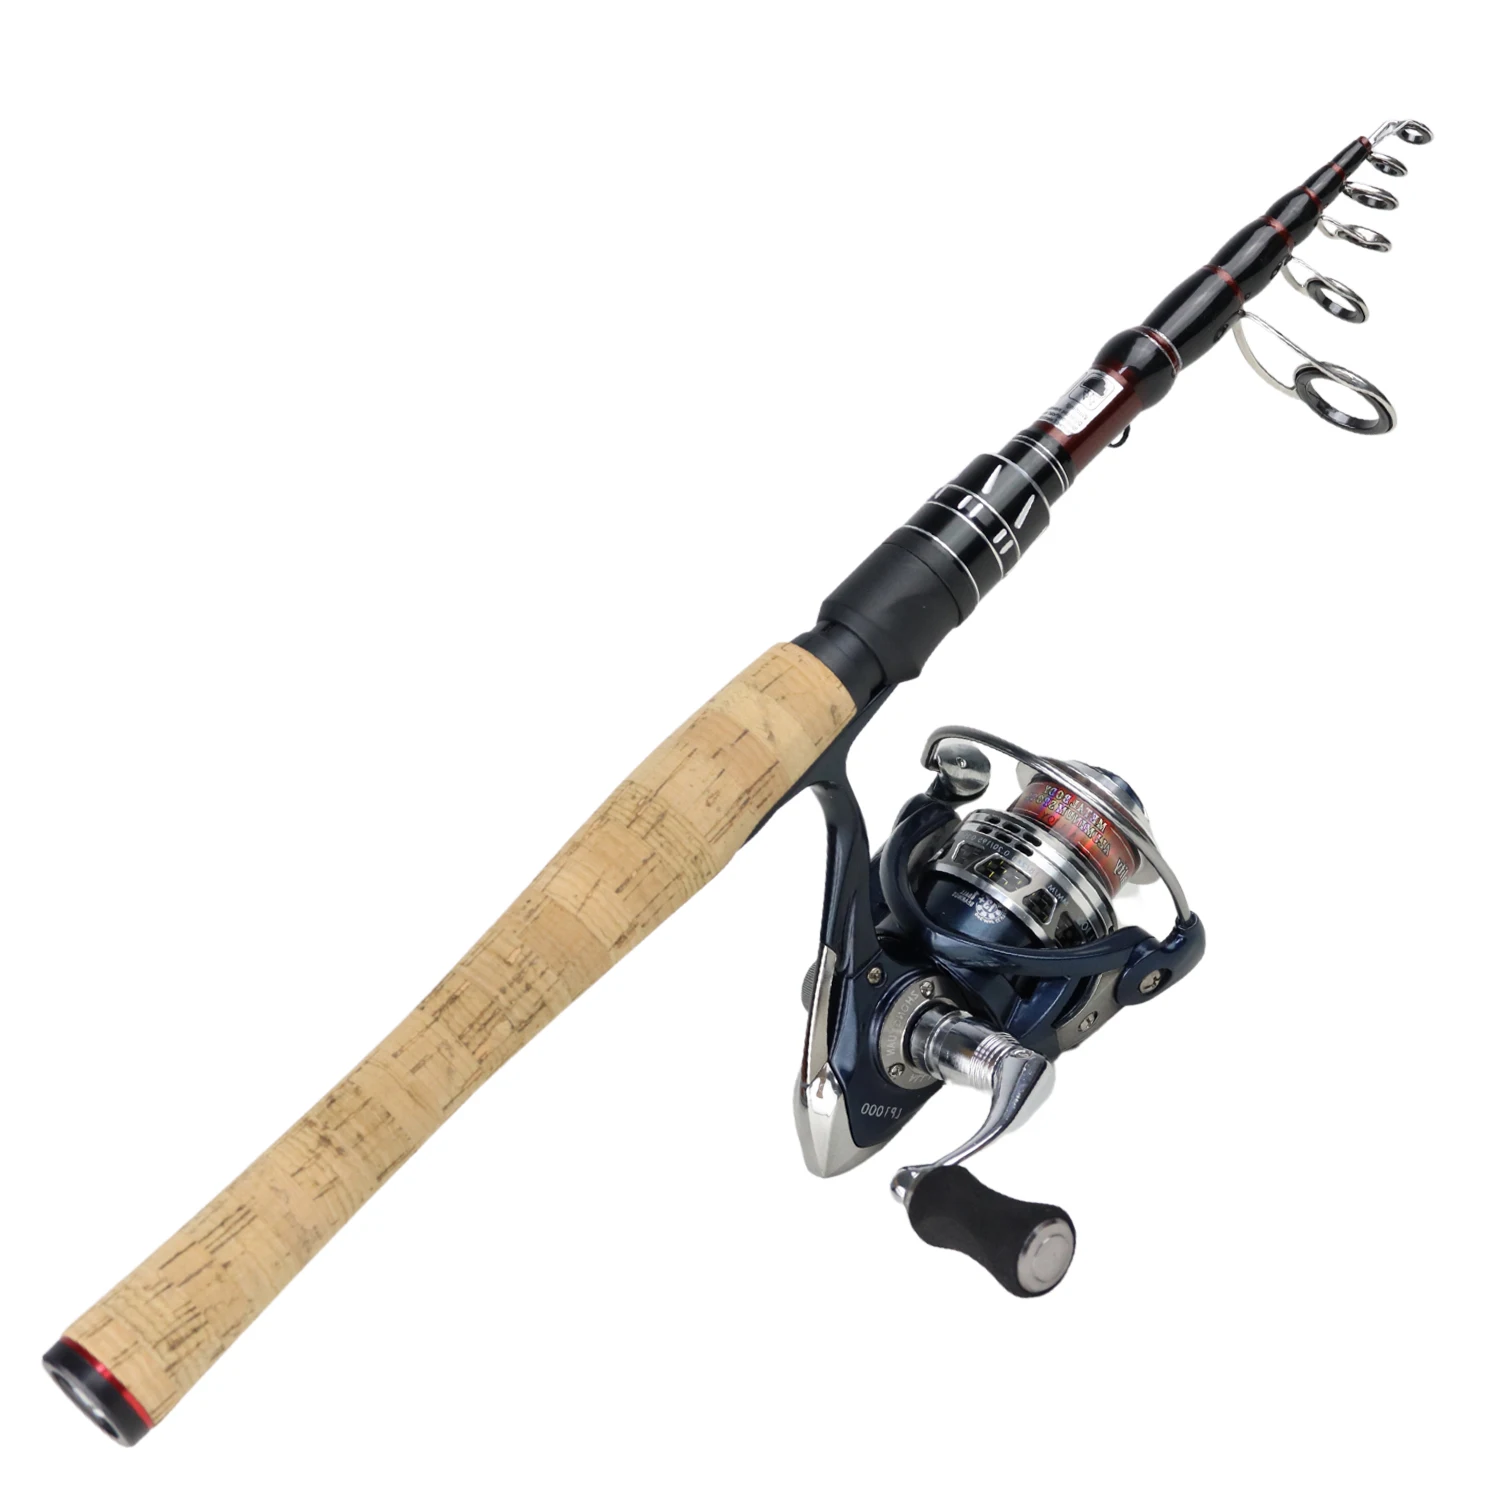 Saltwater Fishing Jigging Rod 1.8M Lure Weight Carbon Boat Spinning Pole Rods 